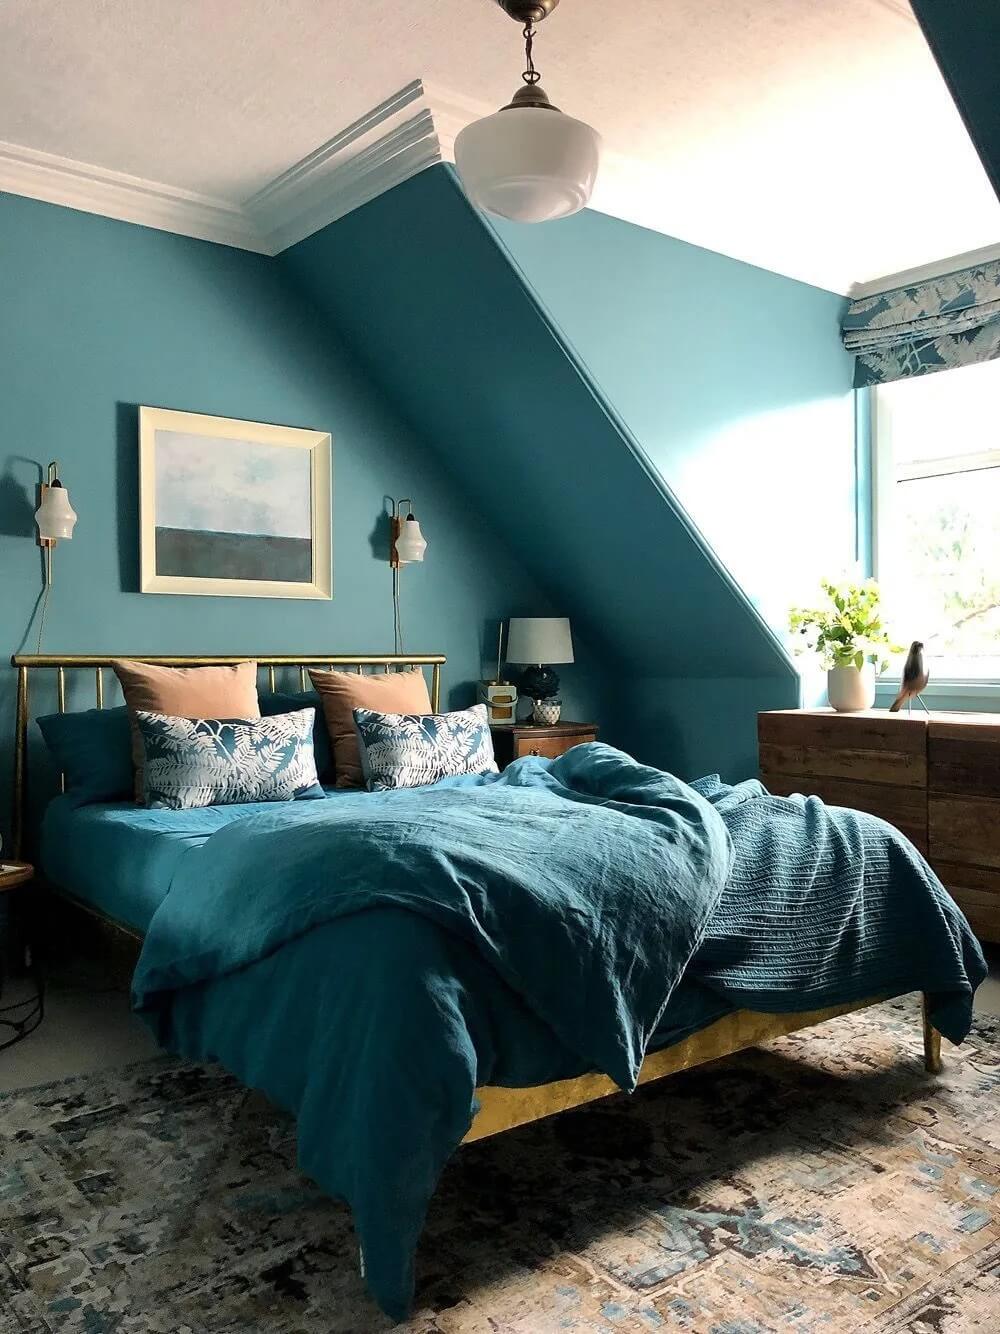 teal-bedroom-walls-bedding-sloped-ceiling-earthy-color-accents-nordroom